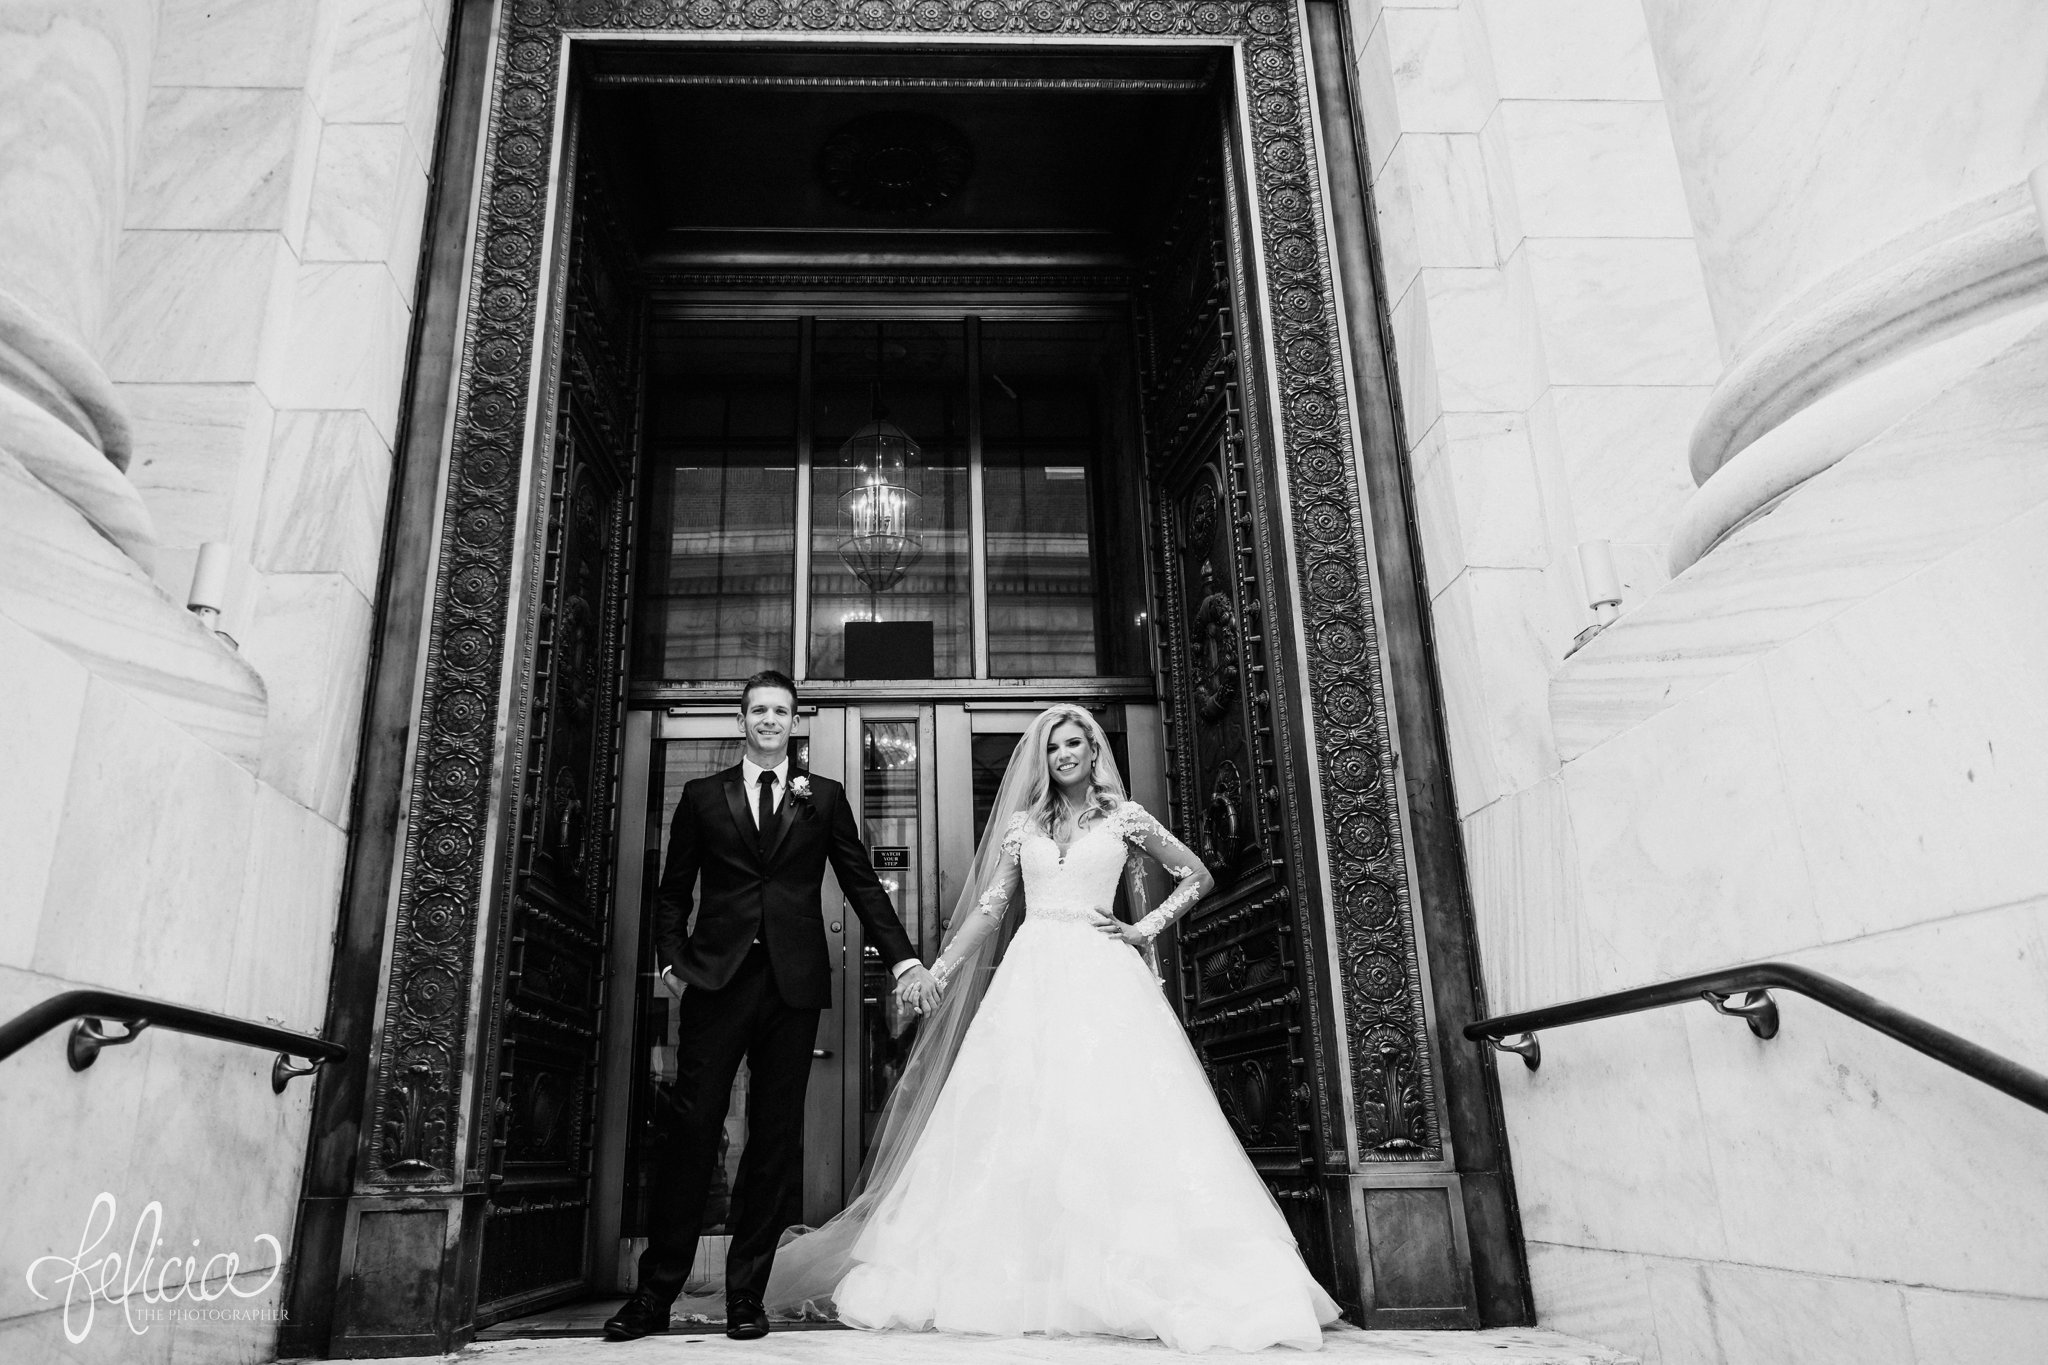 images by feliciathephotographer.com | wedding photographer | kansas city | redemptorist | classic | romantic | power couple | black and white | holding hands | lace dress | glamorous | library | 